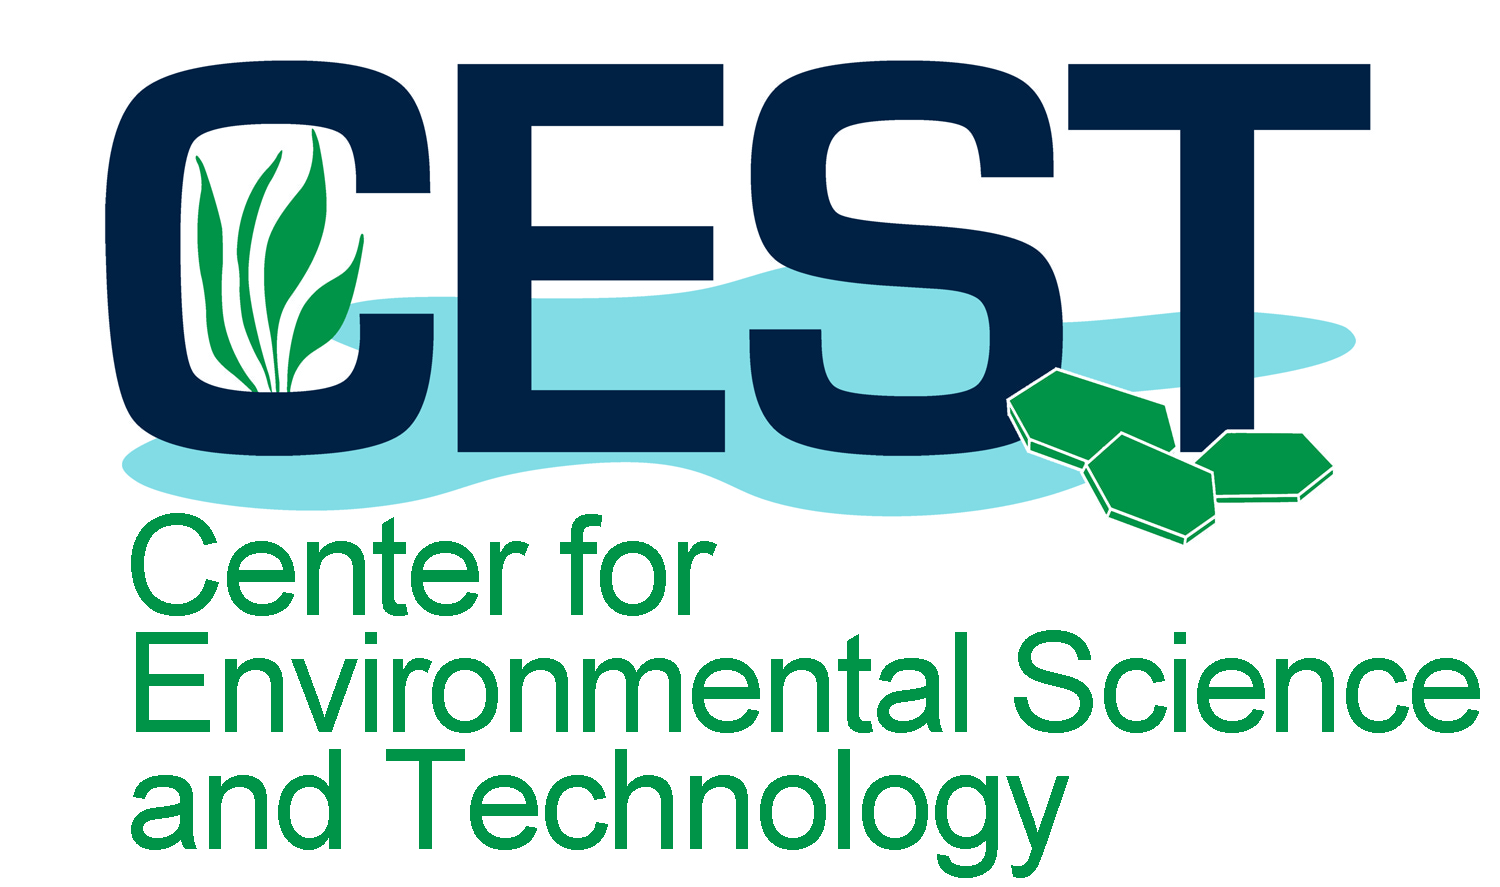 Center for Environmental Science & Technology